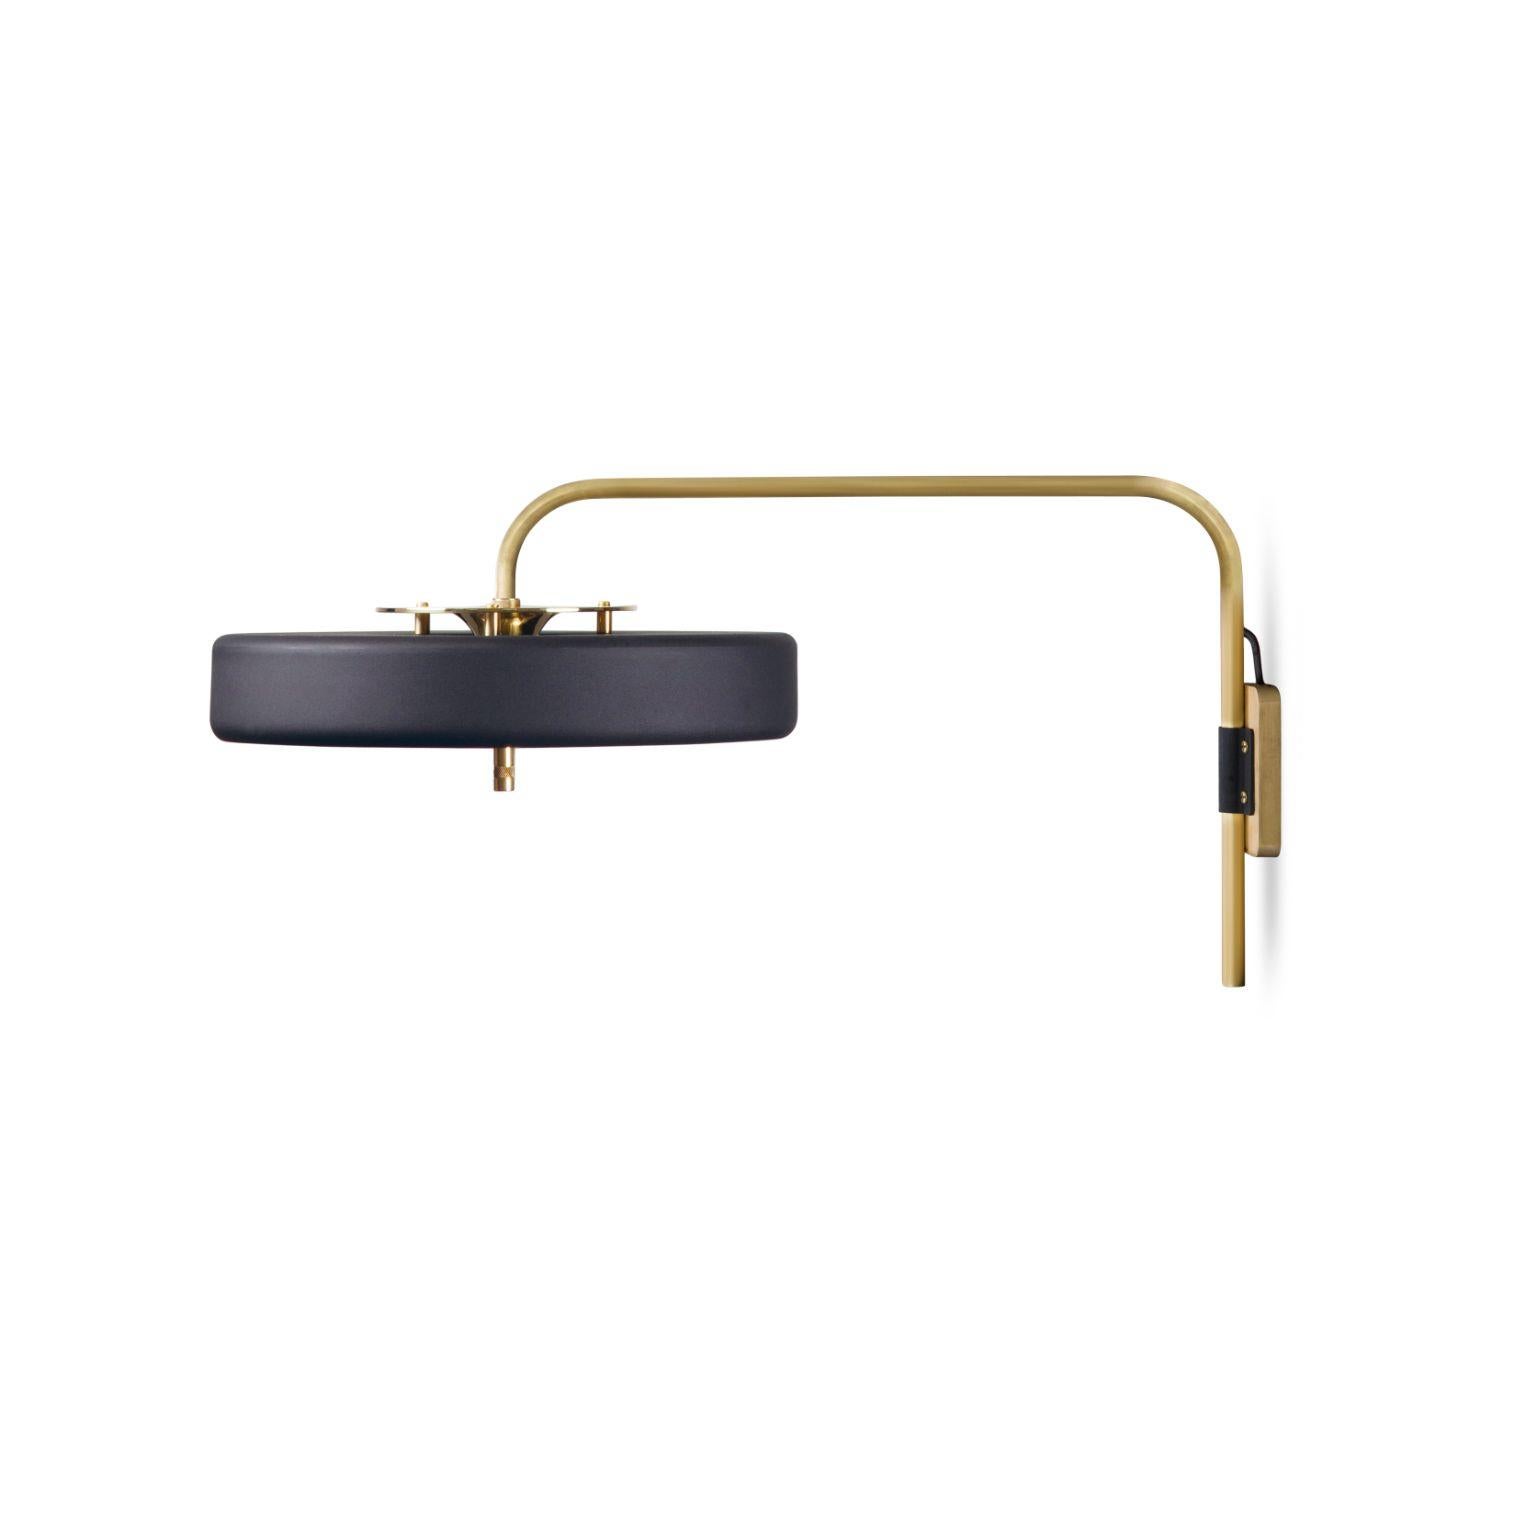 Revolve wall light - Brushed brass - Black by Bert Frank
Dimensions: 31 x 63 x 35 cm
Materials: Brass, steel

Available in polished brass

Flush-fitting opal glass shade with central dome of polished marble – white Carrara or green Guatemala – held